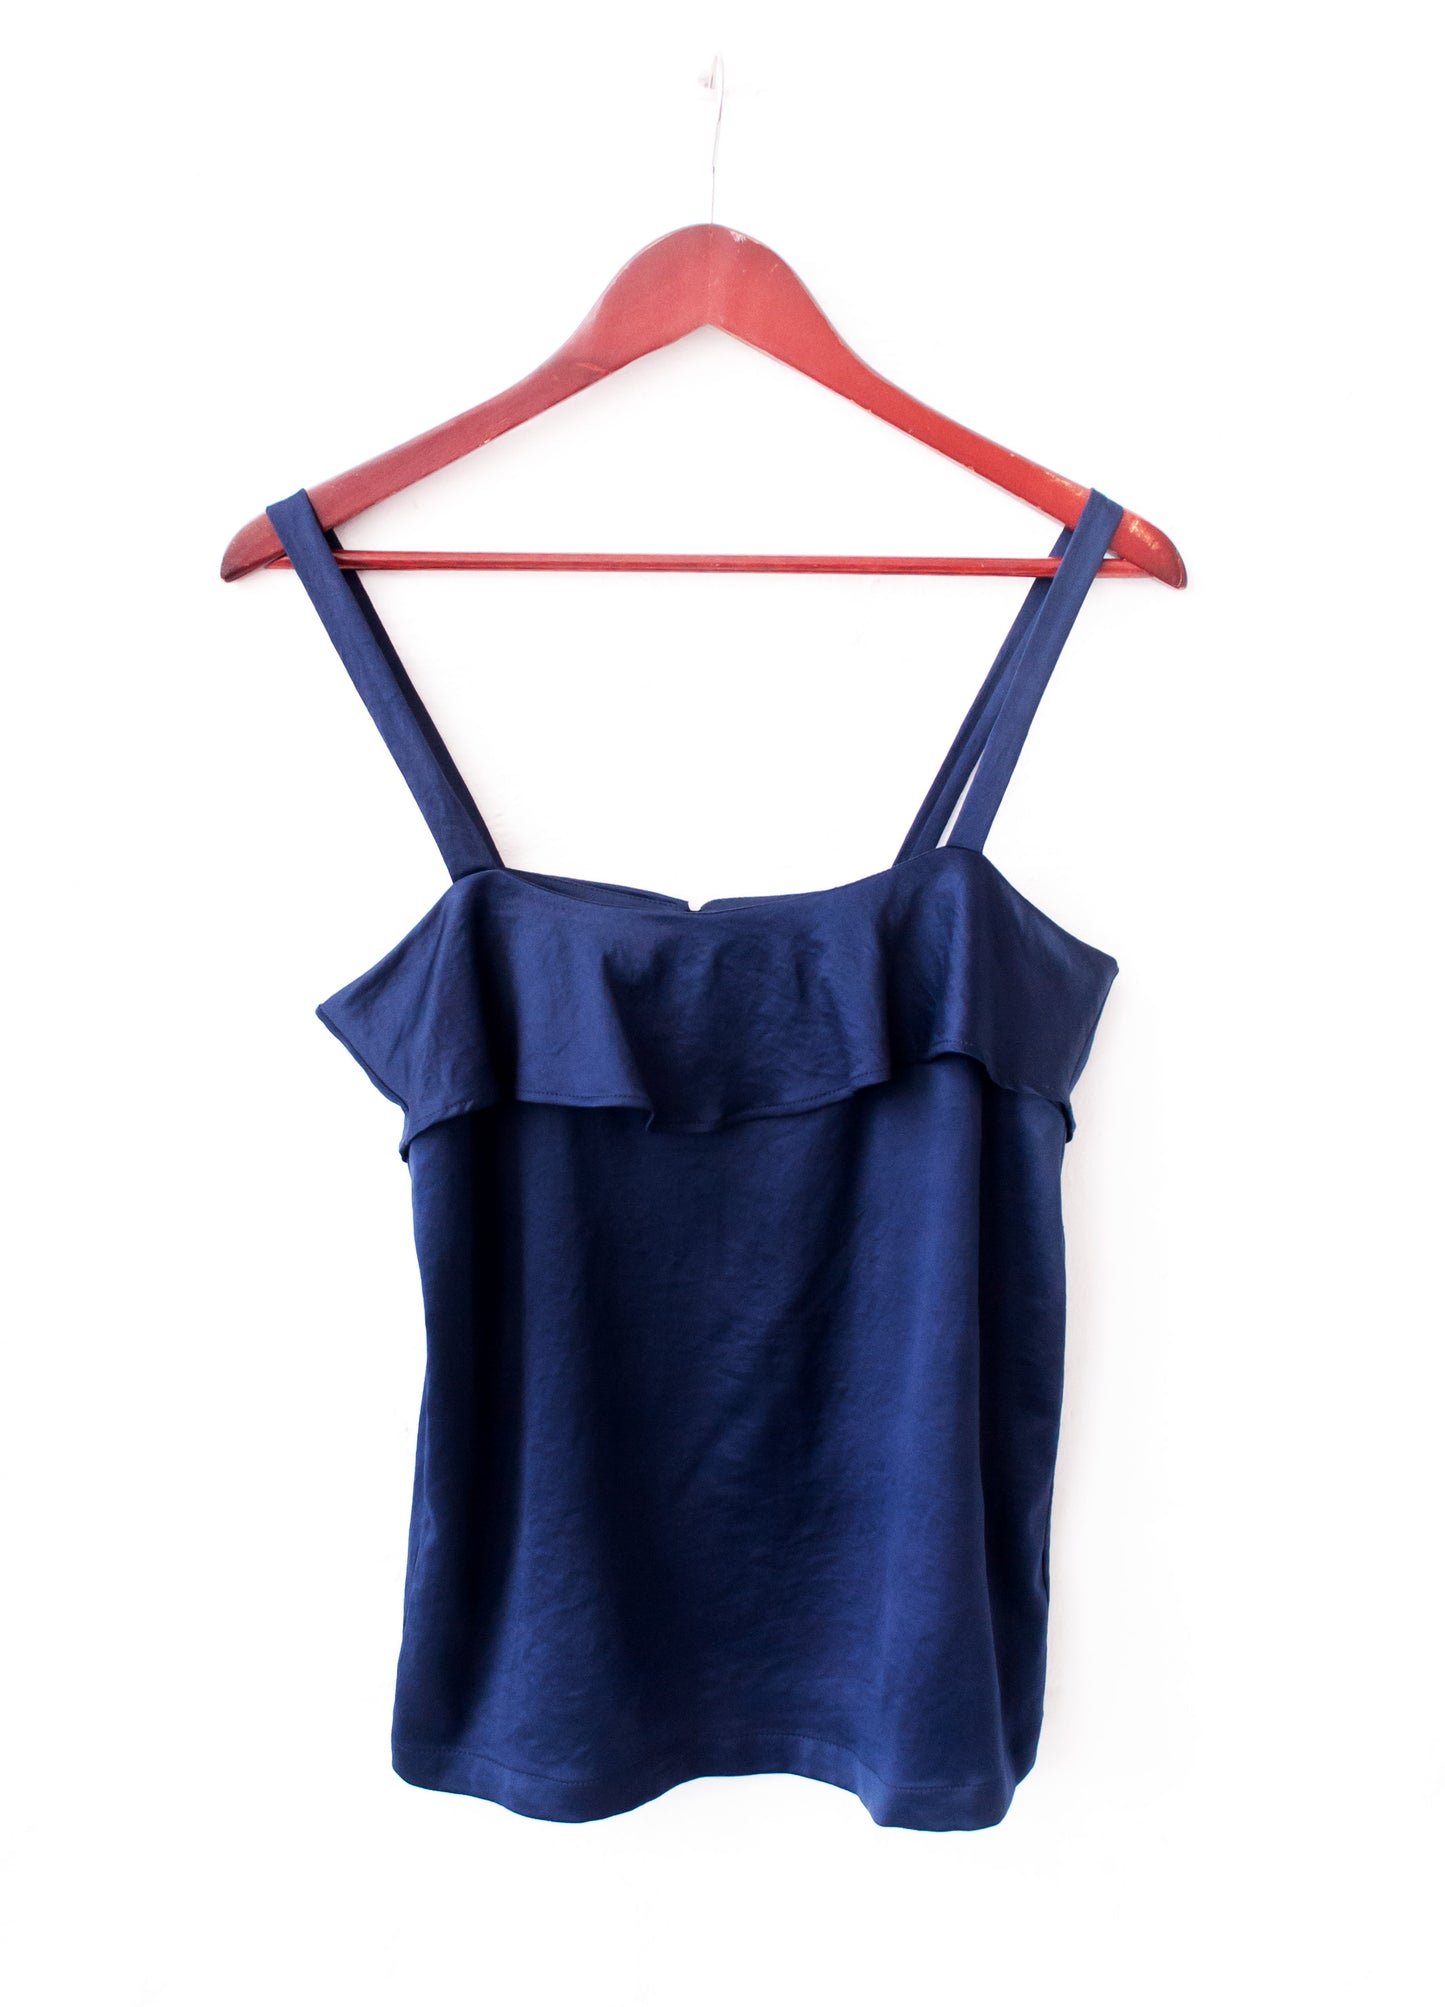 Jessa frill cami in Navy satin in size 32 only